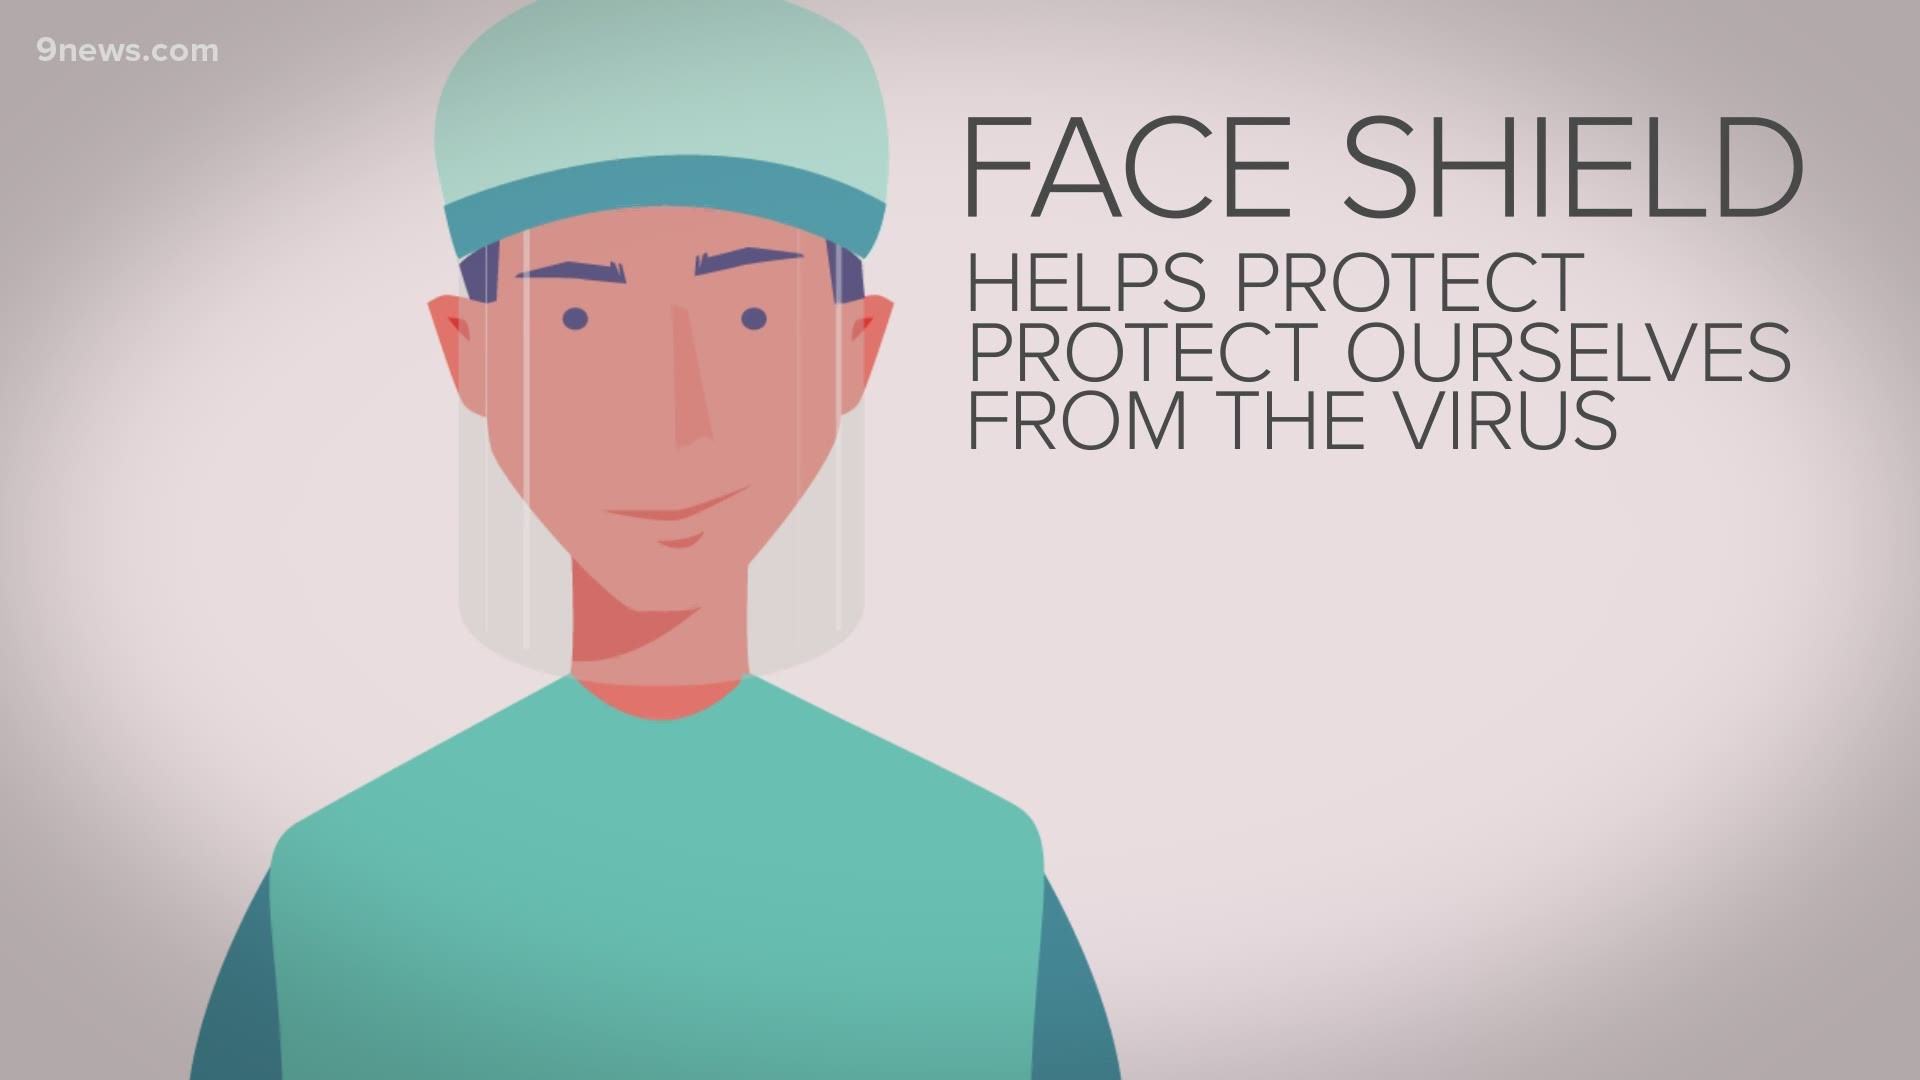 Unlike face masks, shields are much easier to produce and aren't in short supply right now.